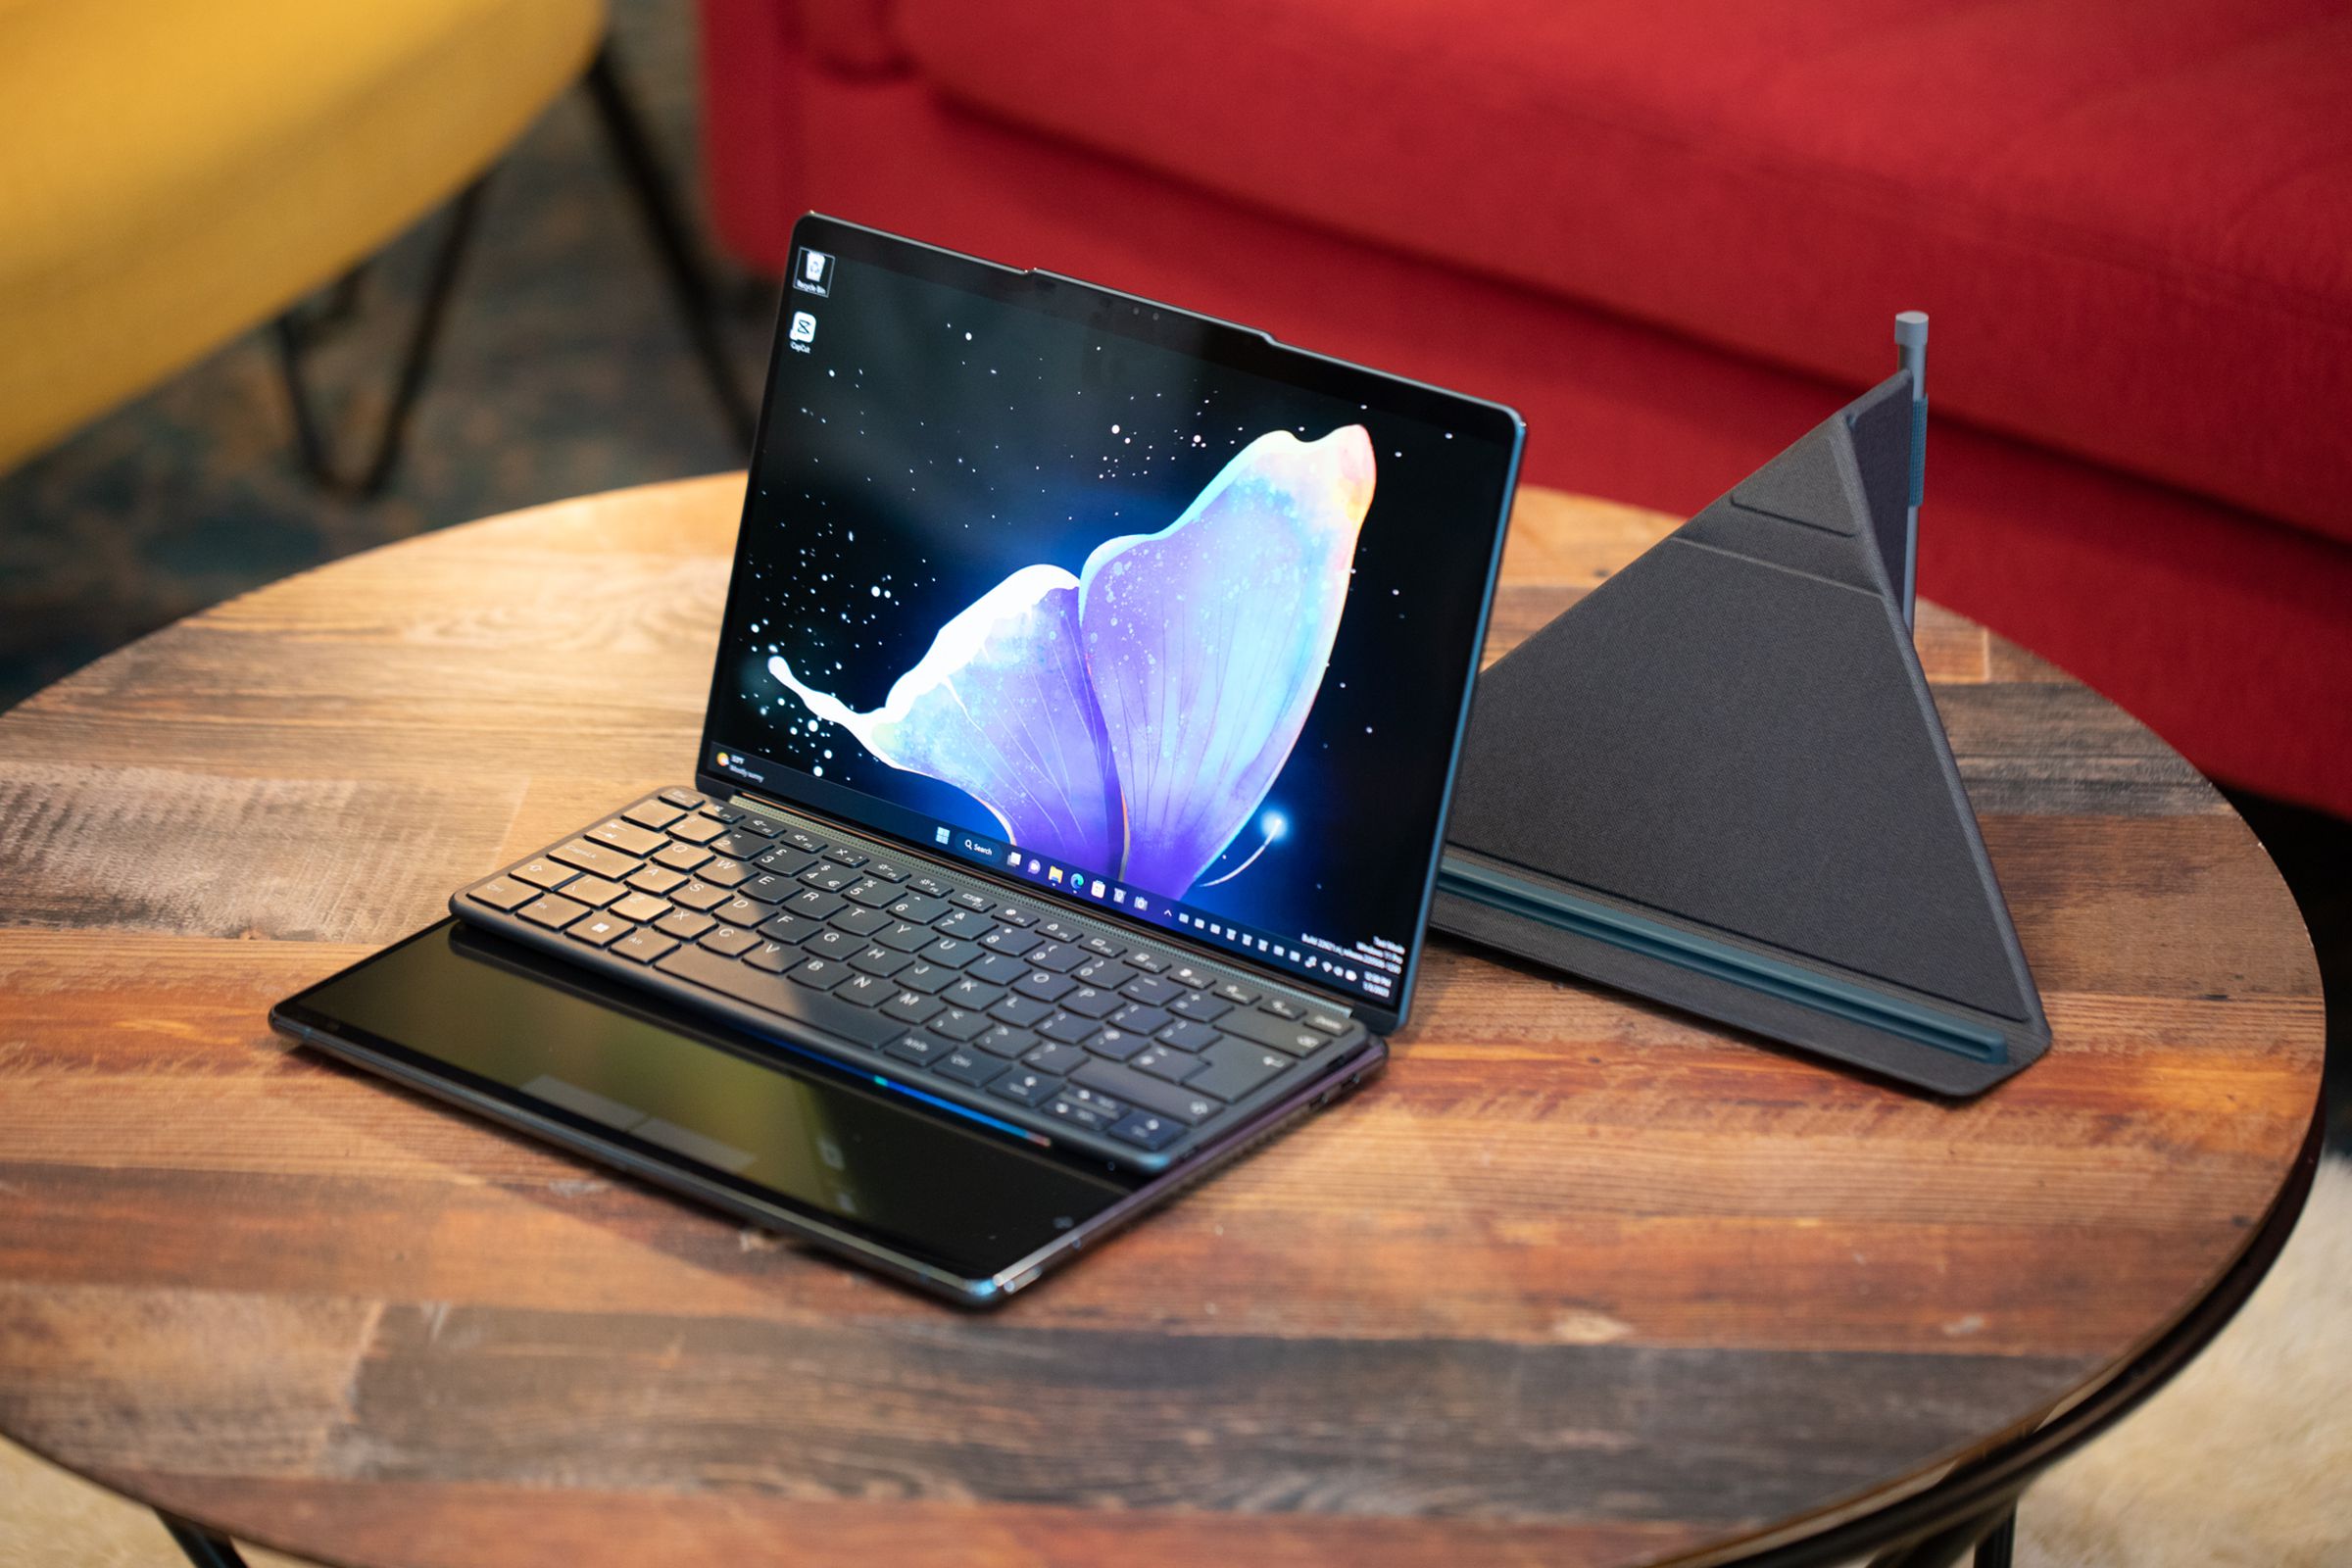 The laptops I’m most excited to test in 2023